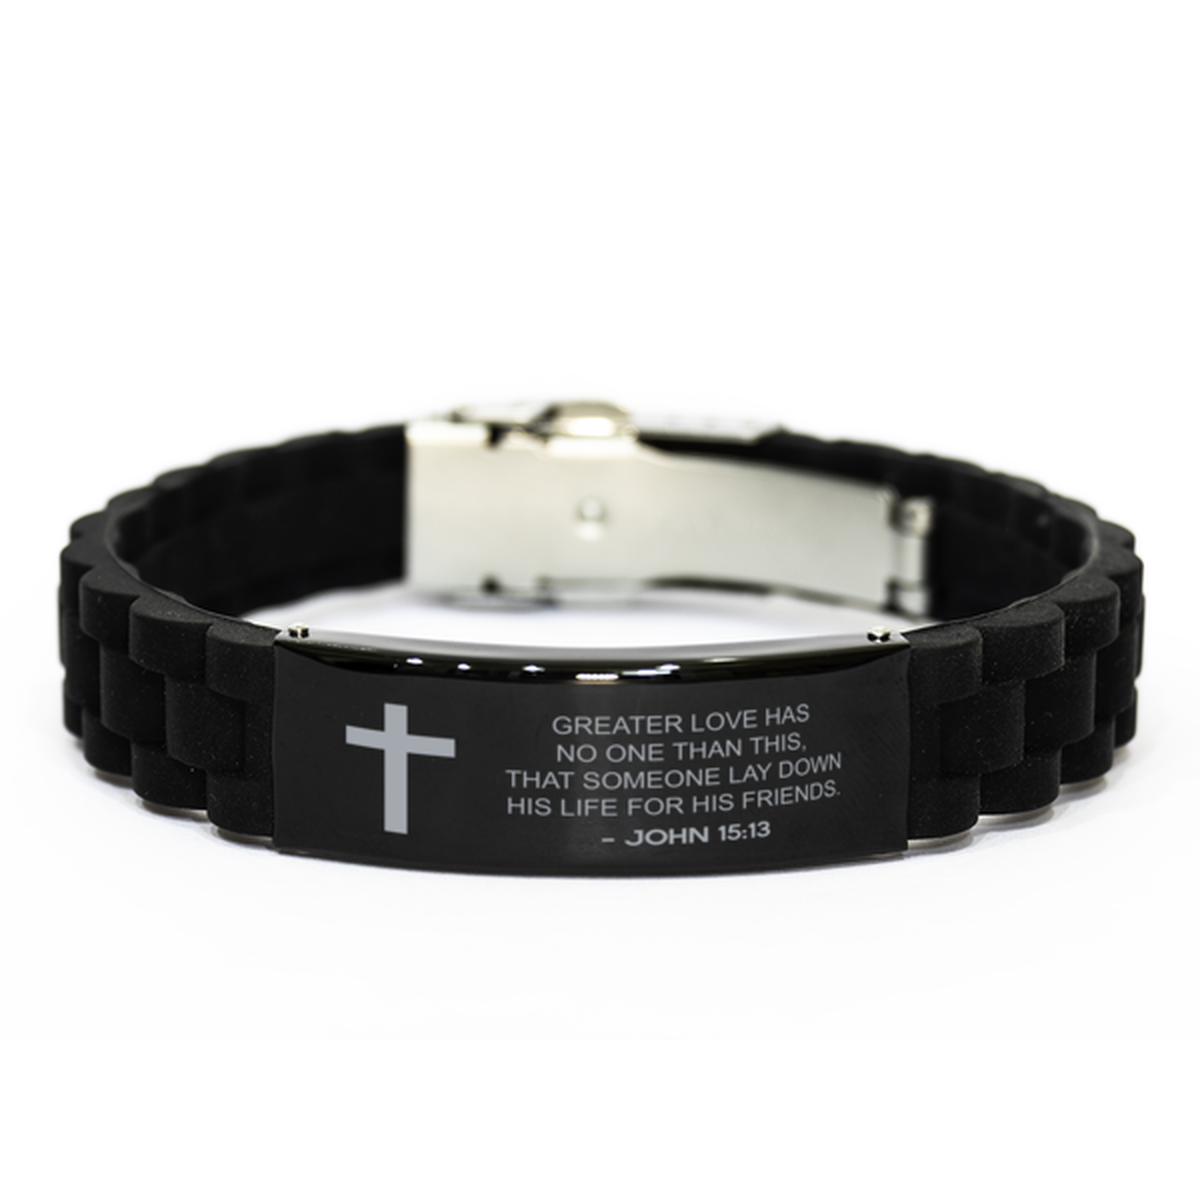 Bible Verse Black Bracelet,, John 15:13 Greater Love Has No One Than This, That Someone, Inspirational Christian Gifts For Men Women